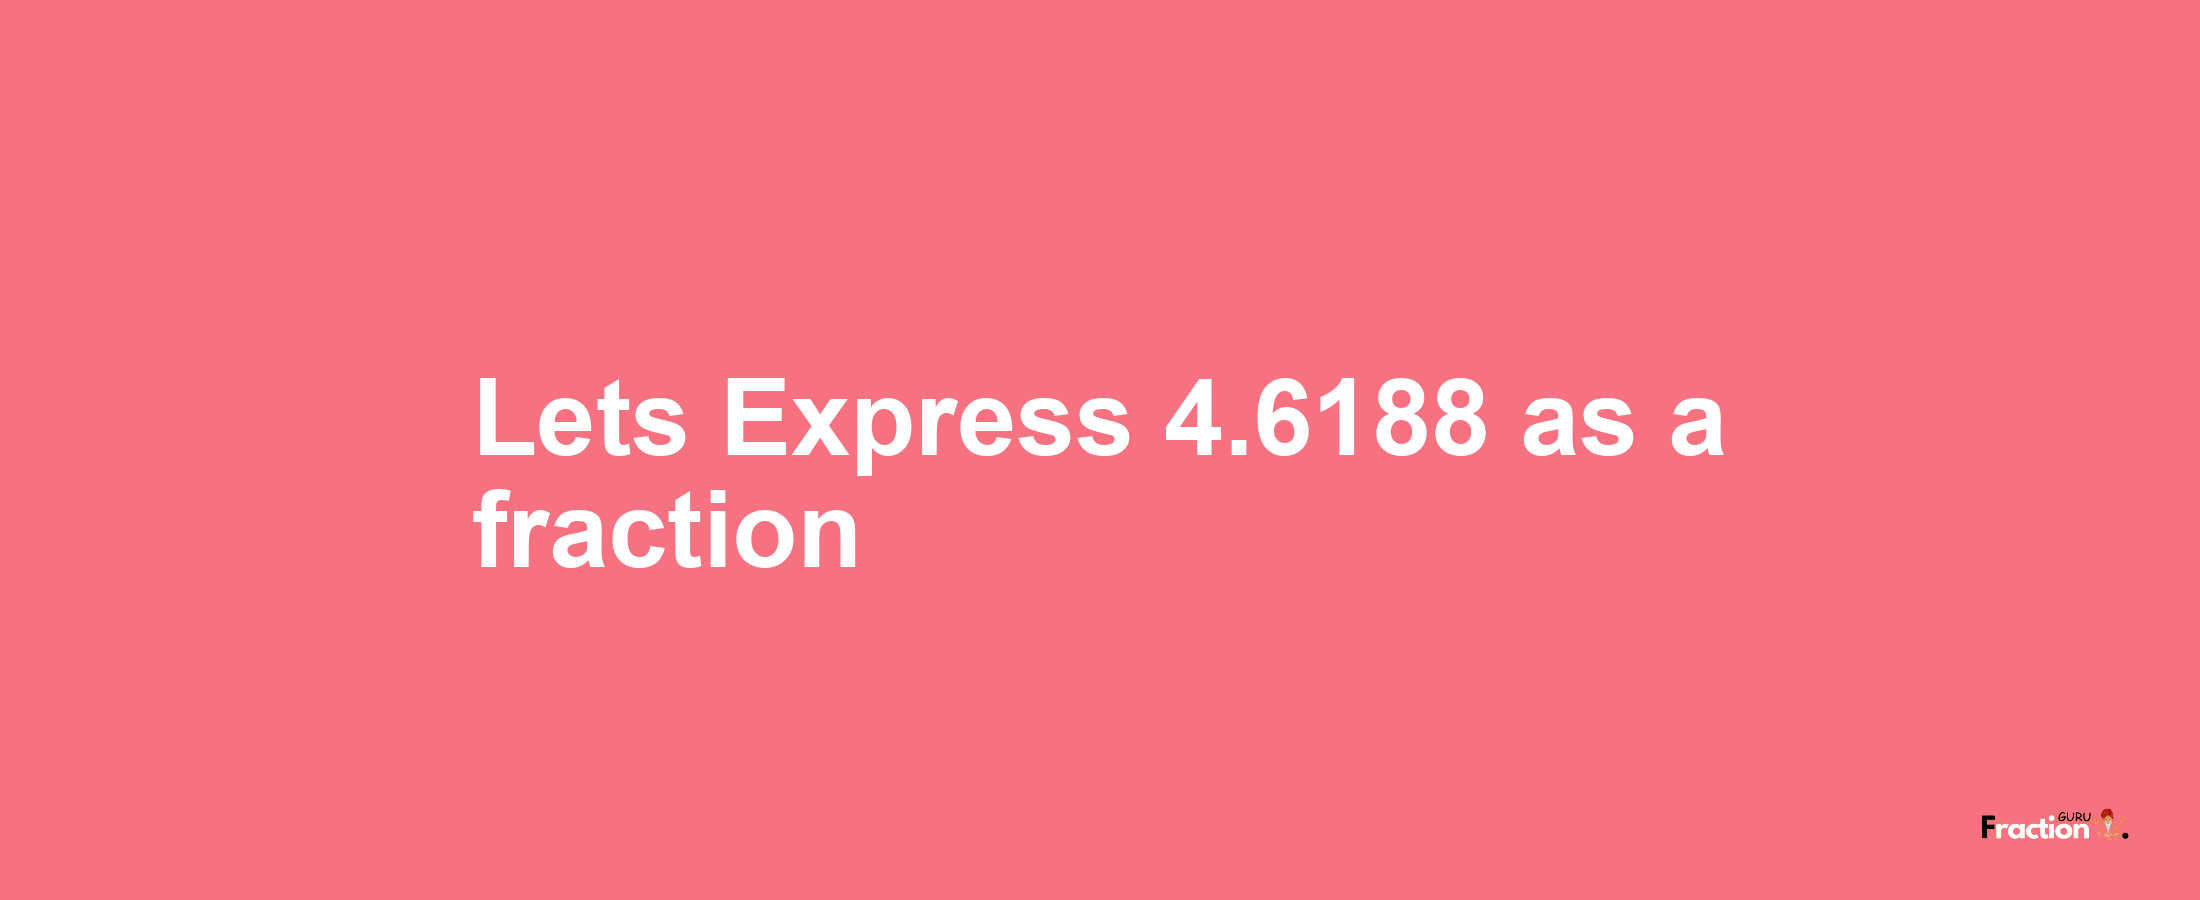 Lets Express 4.6188 as afraction